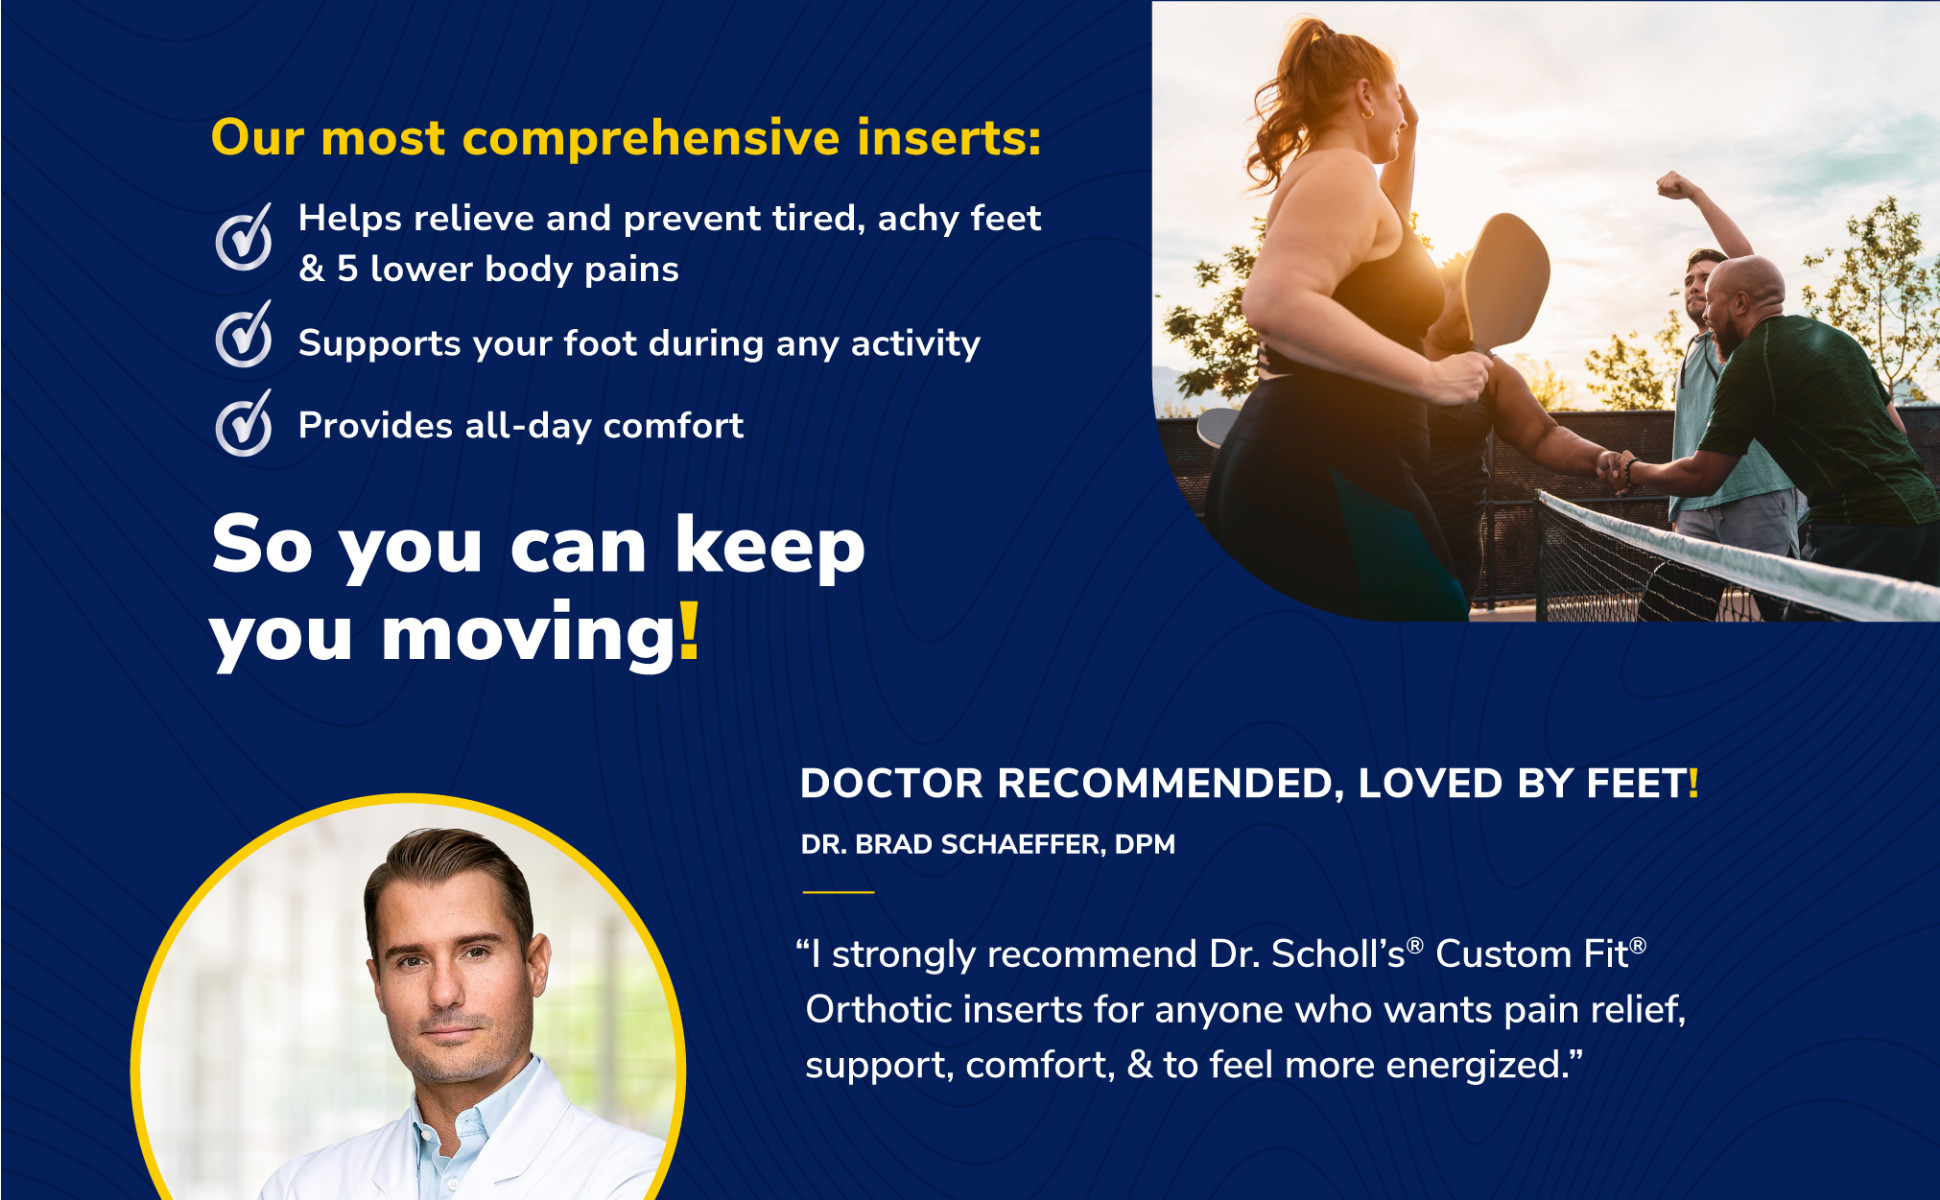  Dr. Scholl's® Custom Fit® Orthotics 3/4 Length Inserts, CF 340,  Customized for Your Foot & Arch, Immediate All-Day Pain Relief, Lower Back,  Knee, Plantar Fascia, Heel, Insoles Fit Men & Womens